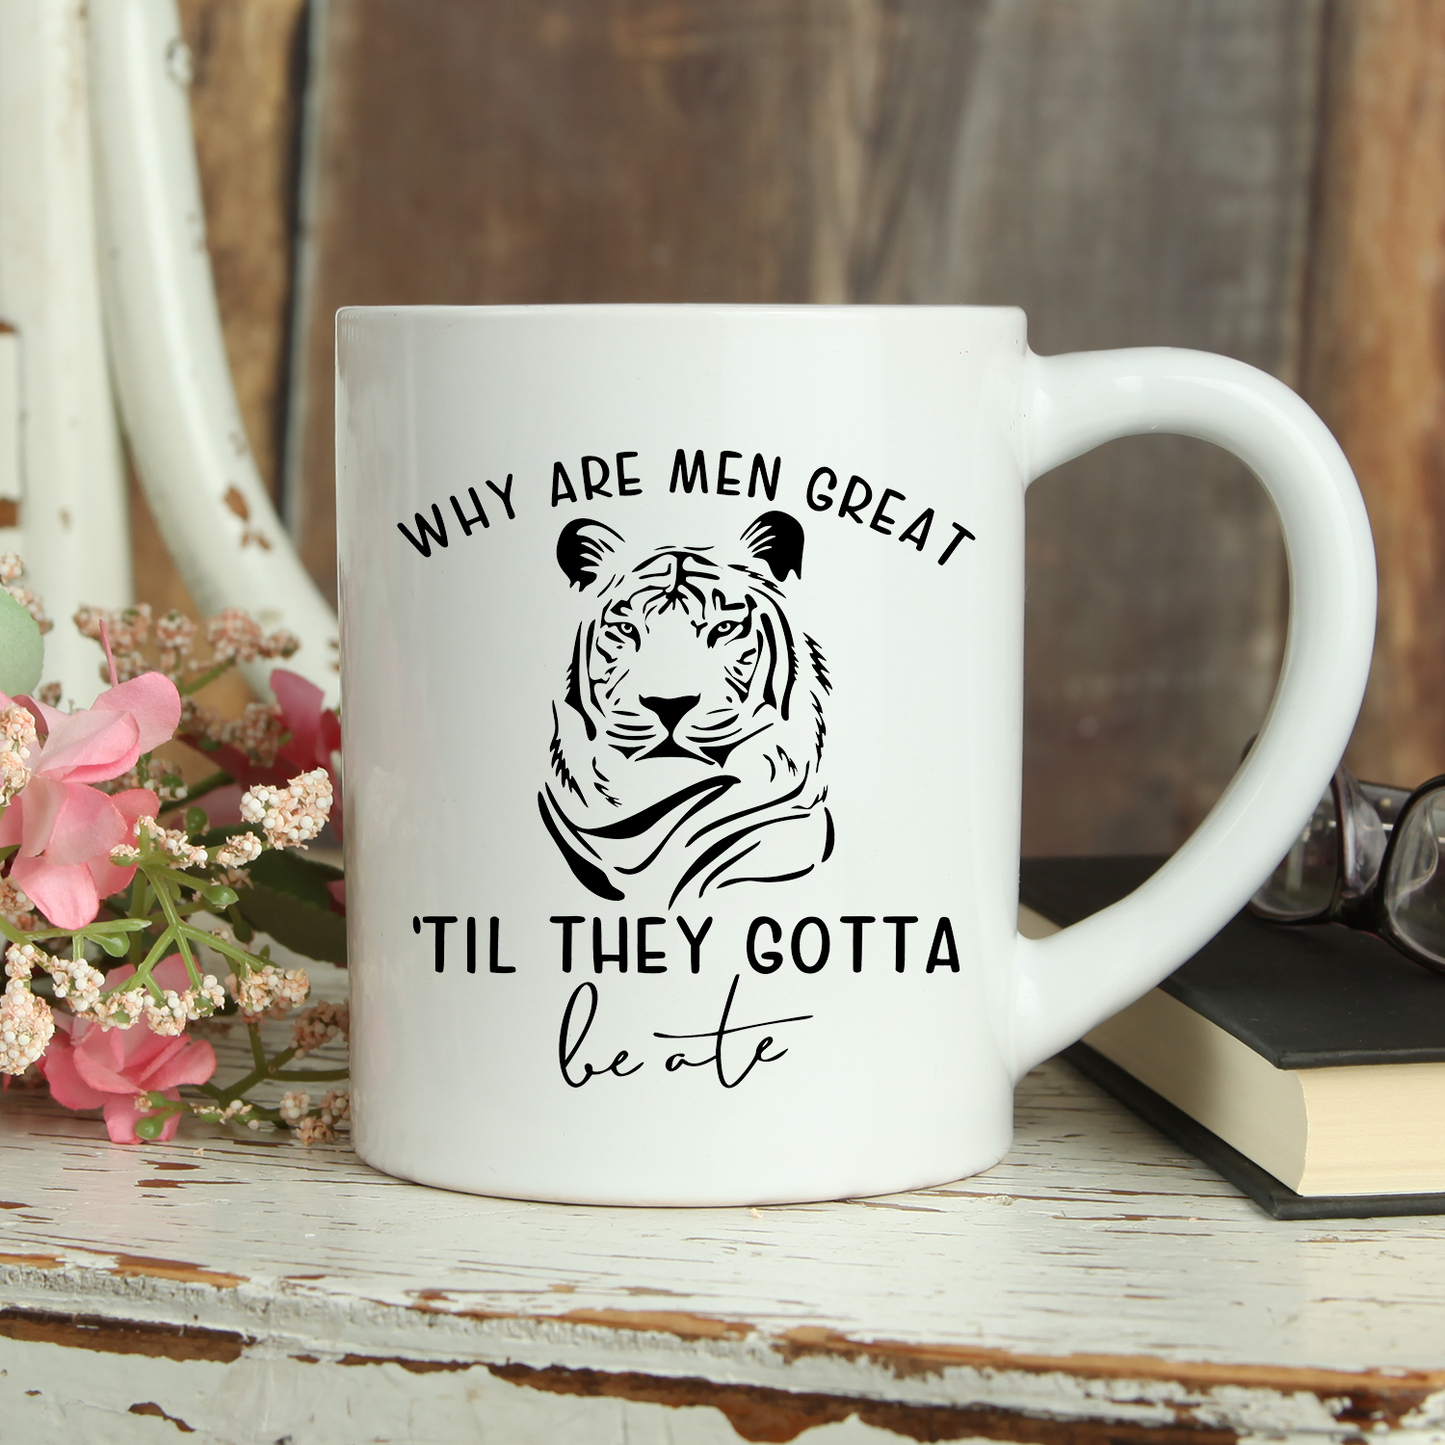 Why are men great til they gotta be ate funny coffee/tea Mug.